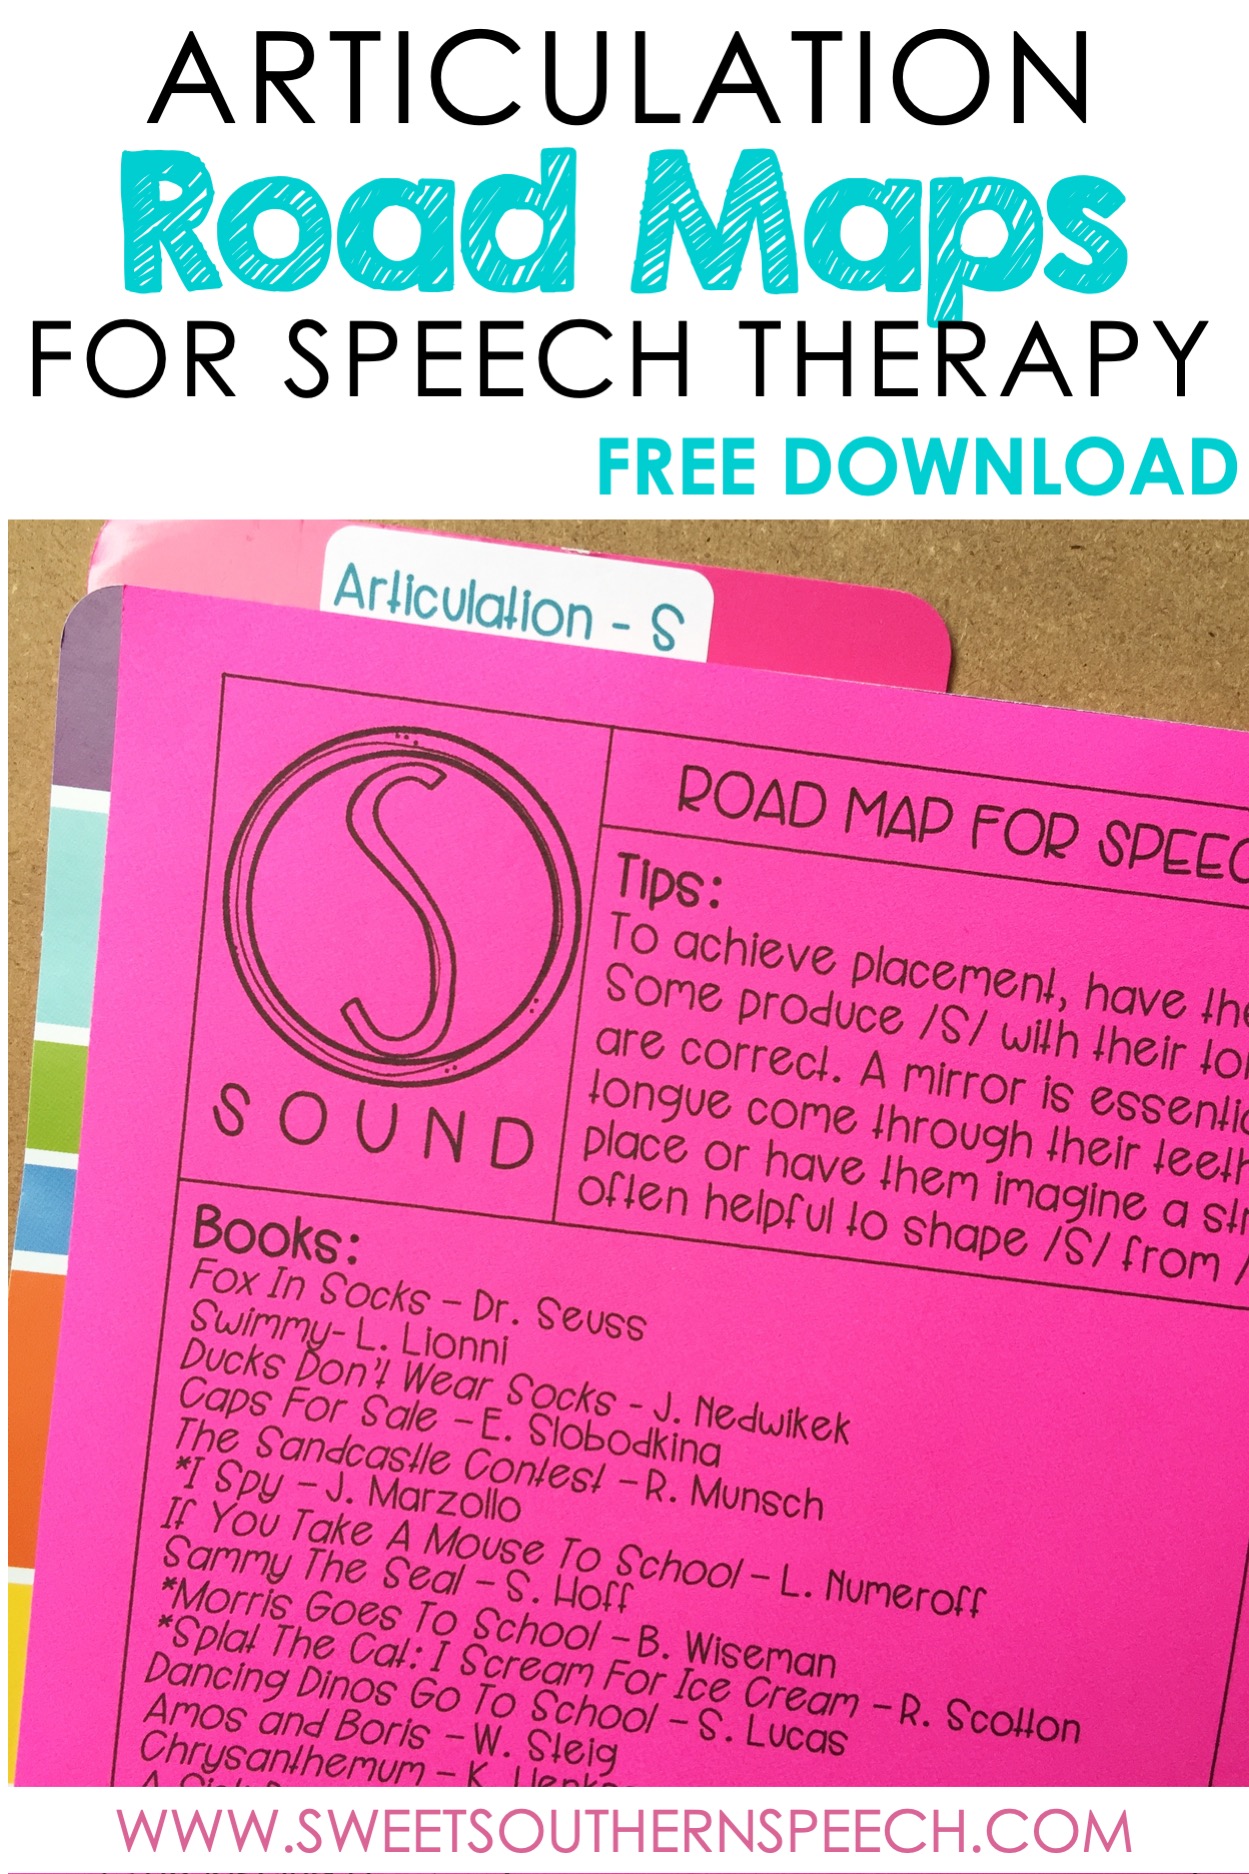 Articulation Books for S sounds in speech therapy